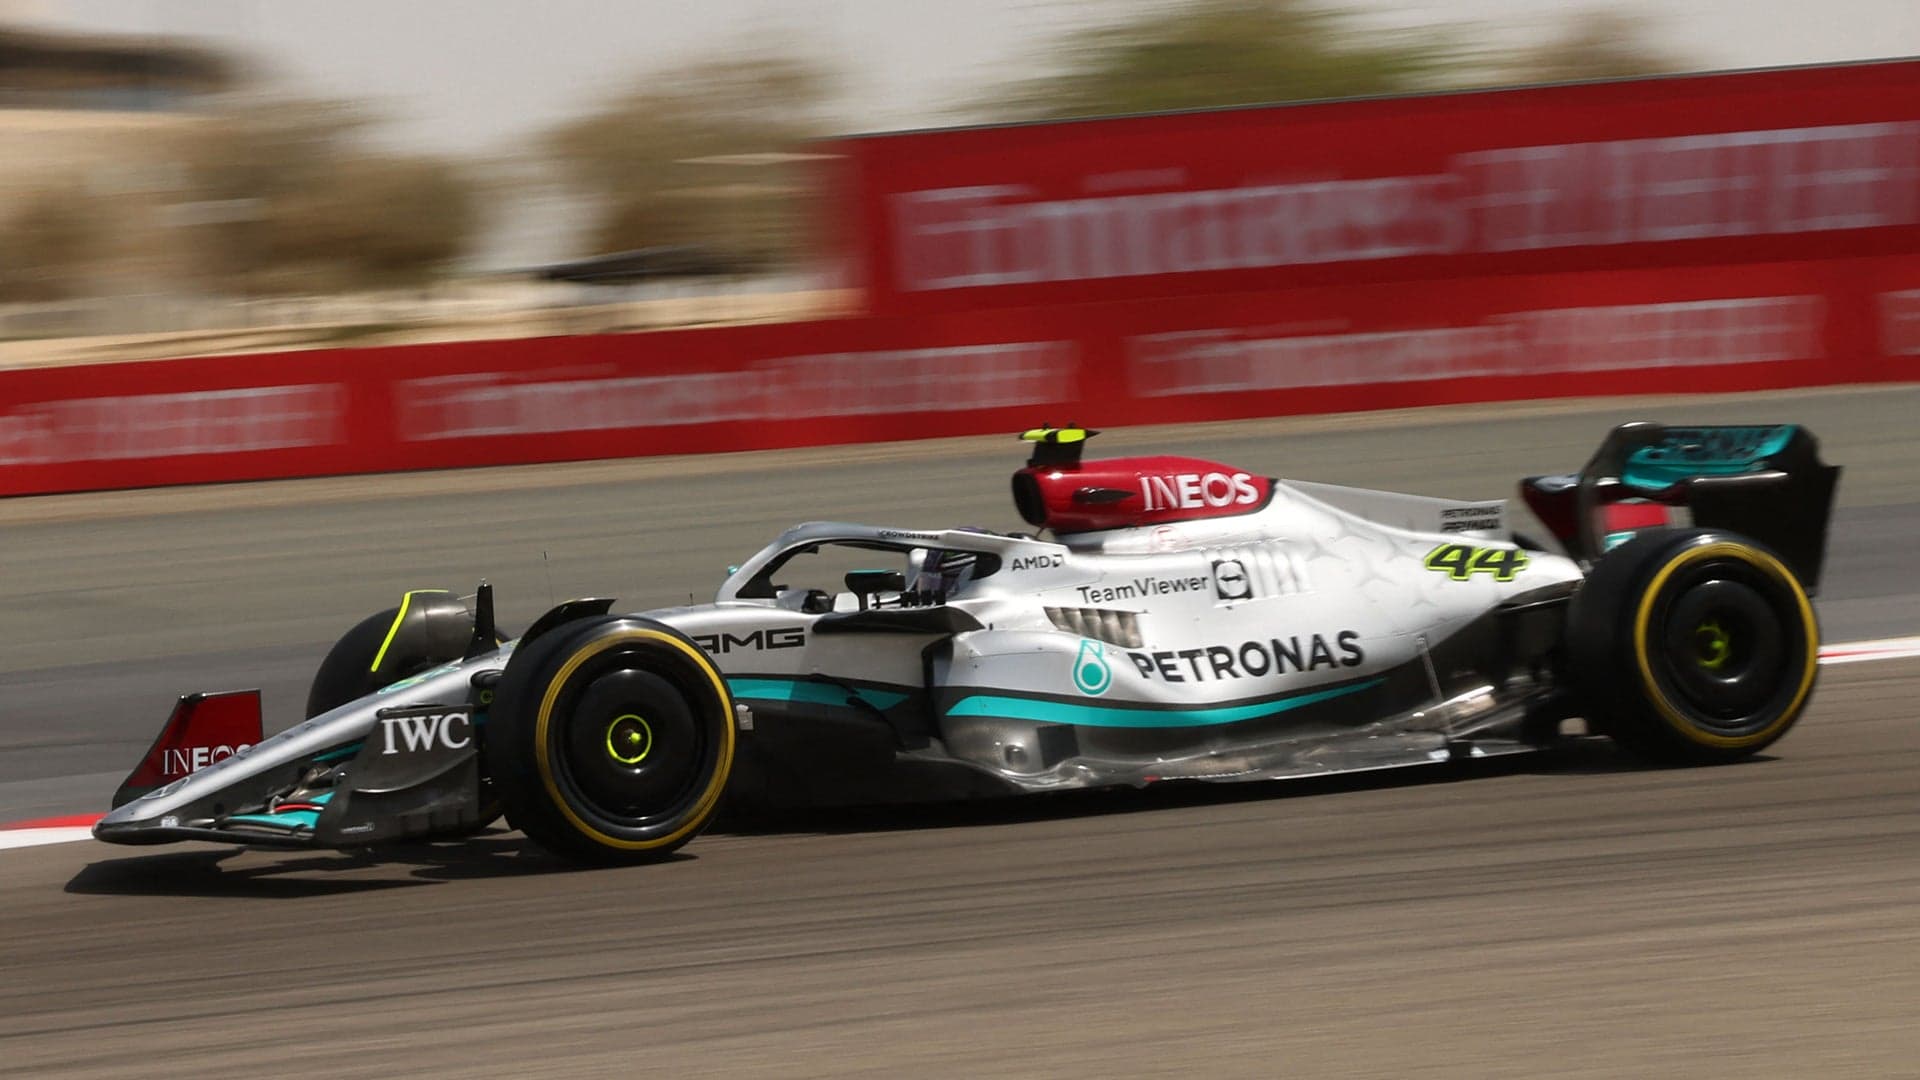 How Mercedes Perplexed the F1 Grid By Running a Car Without Sidepods